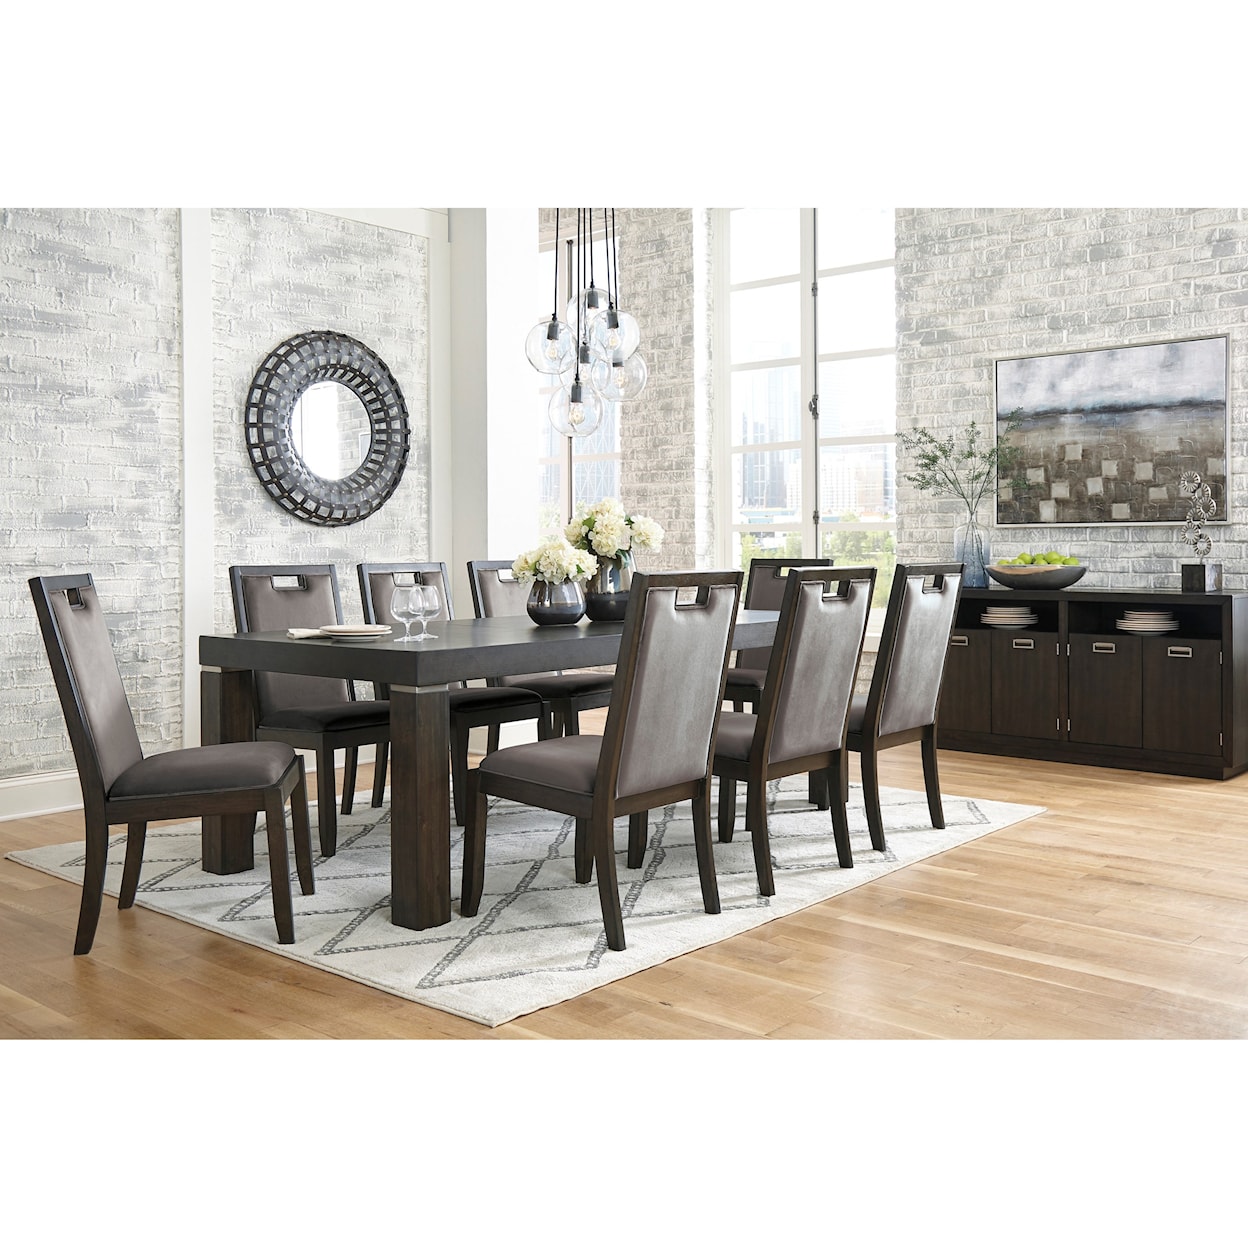 Signature Design by Ashley Furniture Hyndell Dining Room Group